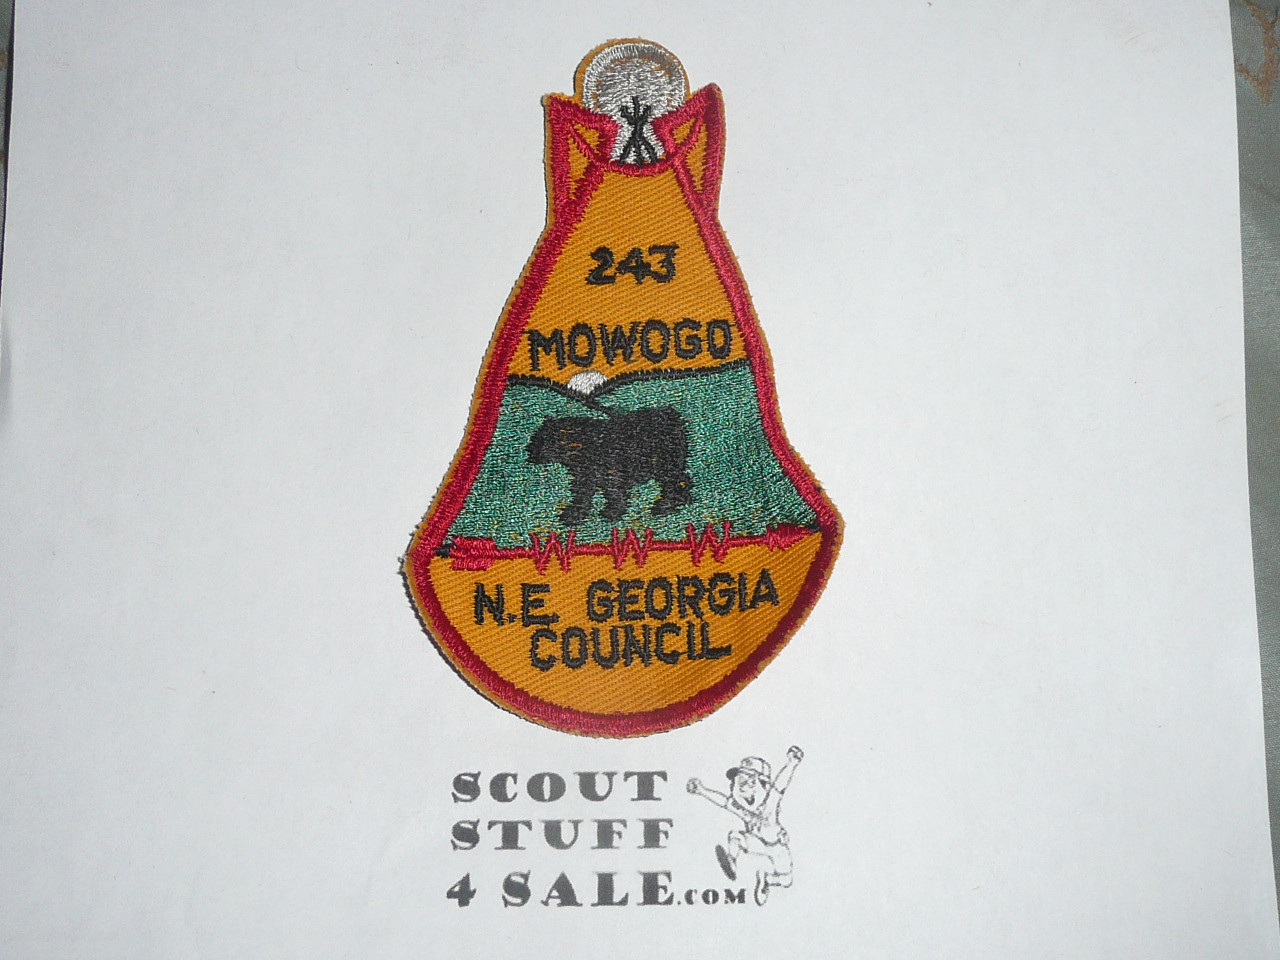 Order of the Arrow Lodge #243 Mowogo x10 Patch